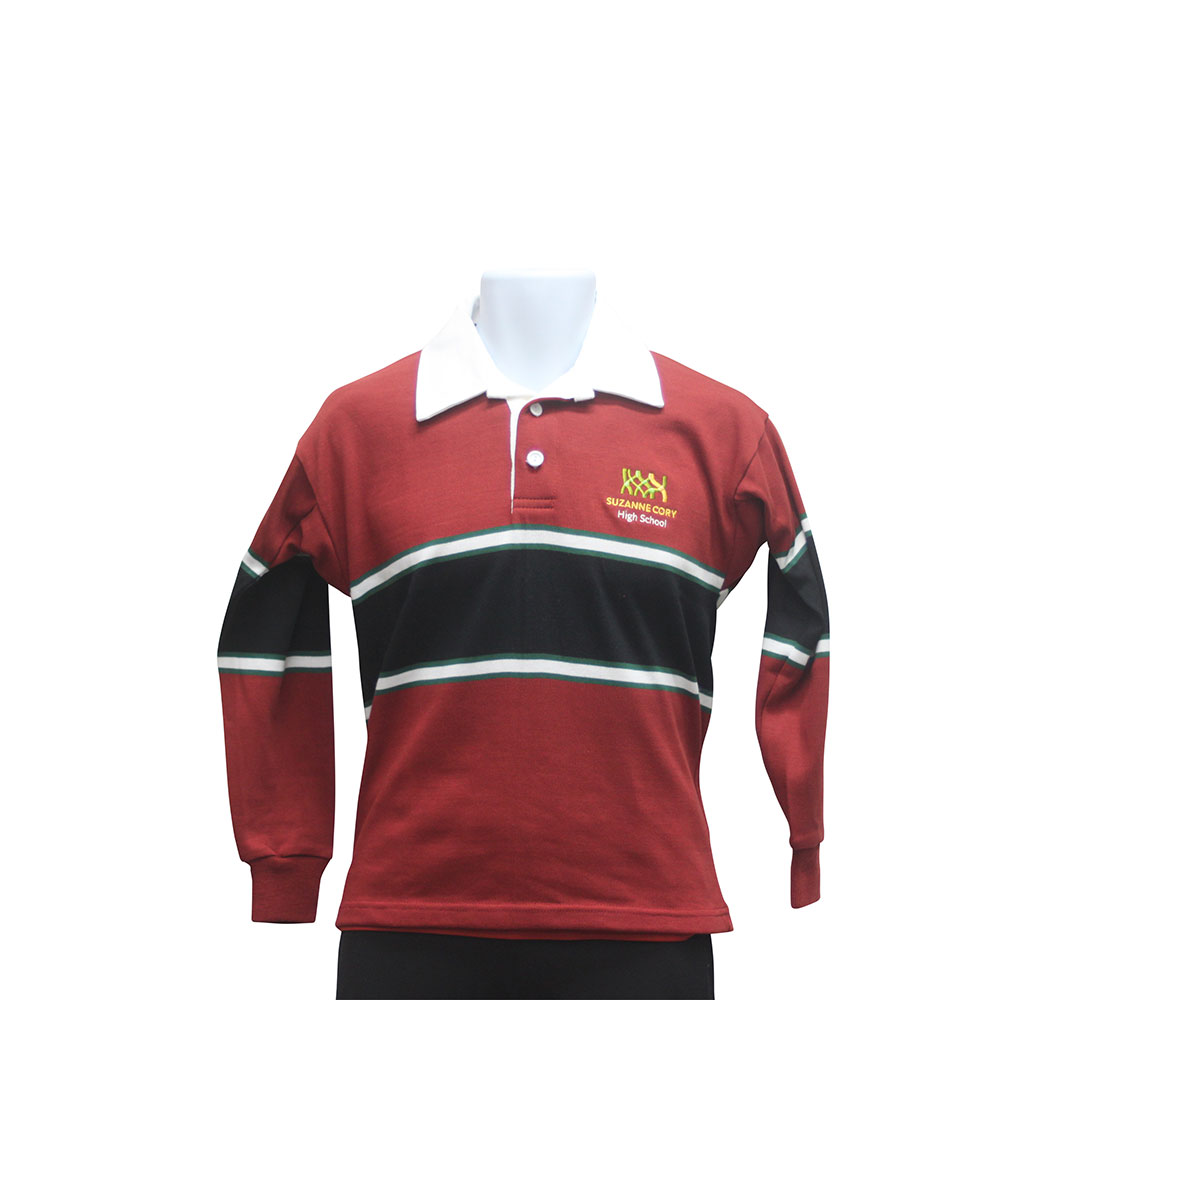 Suzanne Cory H/S Rugby Top, Suzanne Cory High School